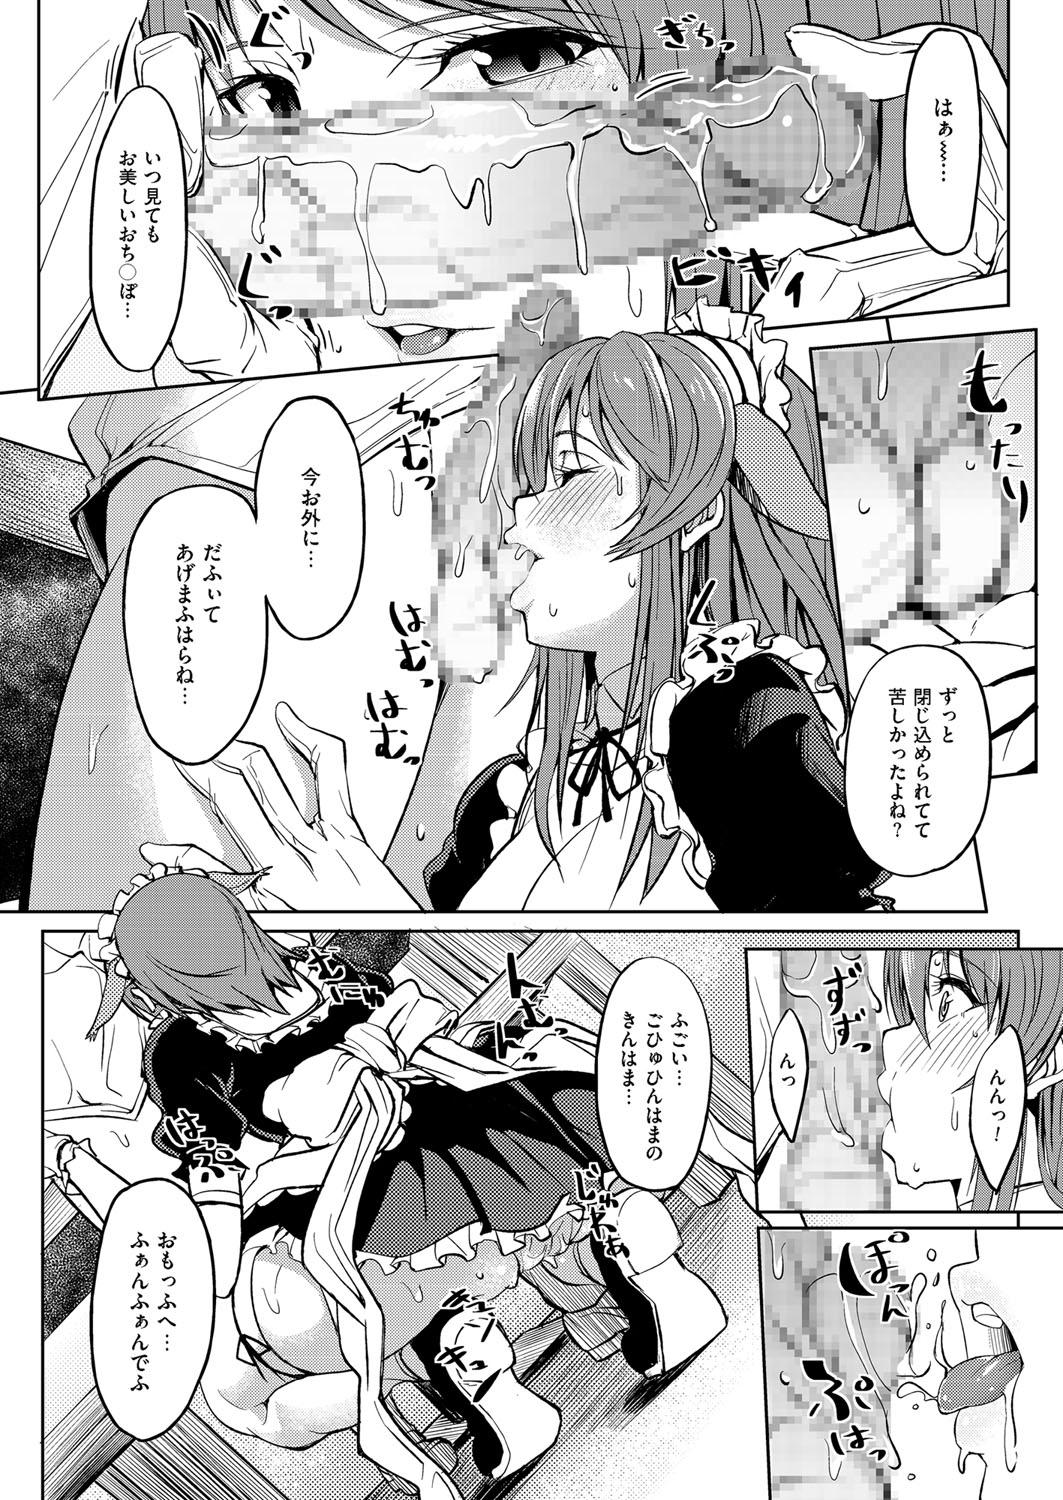 Babe Maid In Nyanko Asshole - Page 8